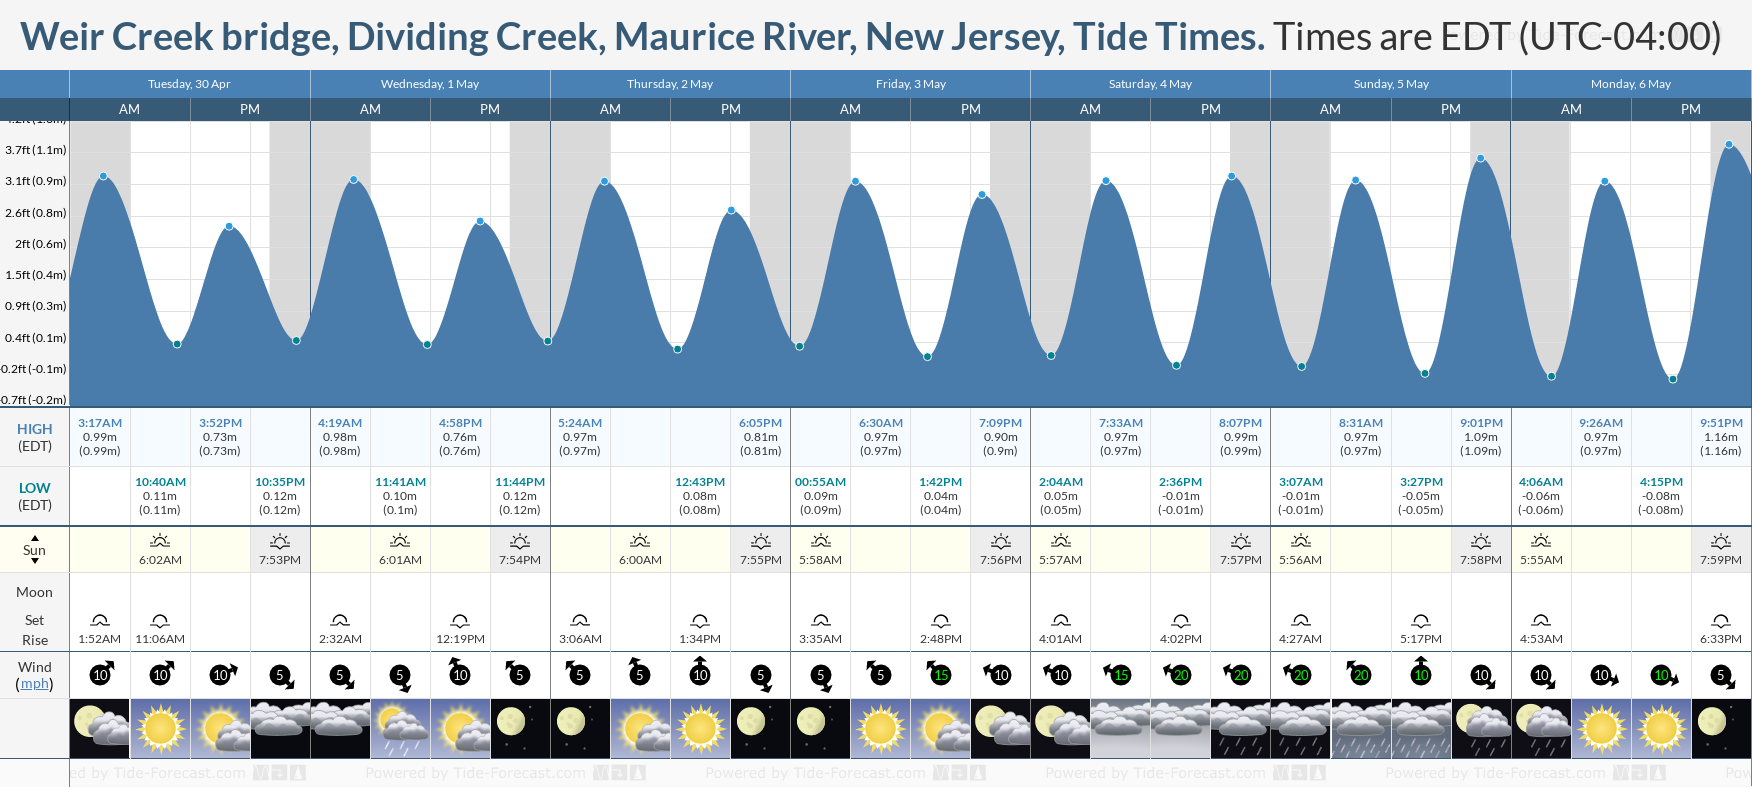 Weir Creek bridge, Dividing Creek, Maurice River, New Jersey Tide Chart including high and low tide tide times for the next 7 days